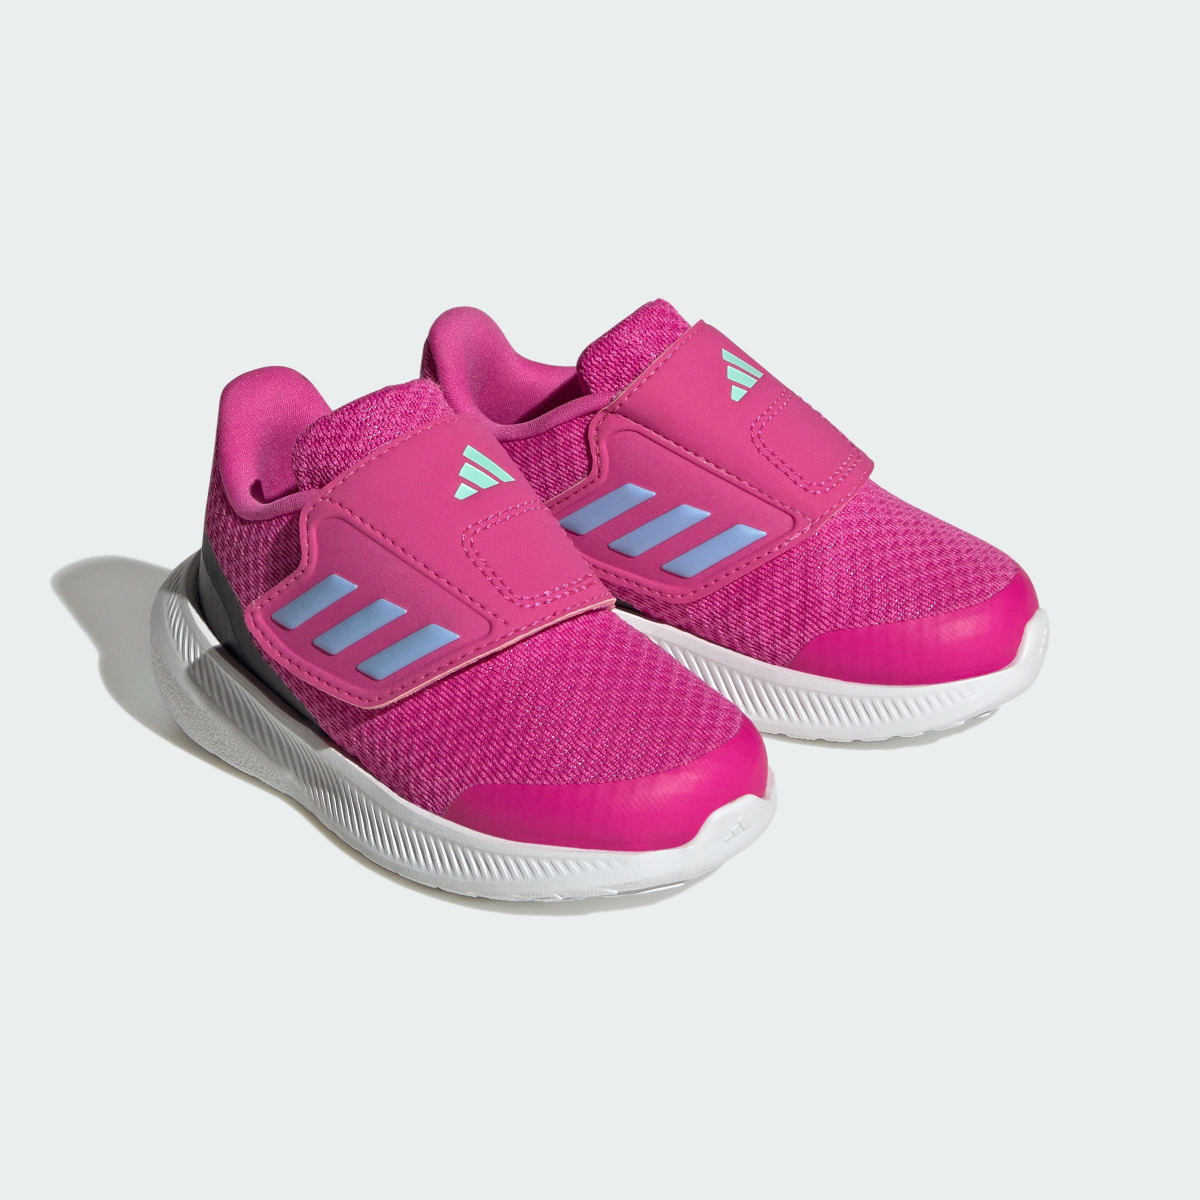 Adidas Runfalcon 3.0 Sport Running Hook-and-Loop Shoes. 5